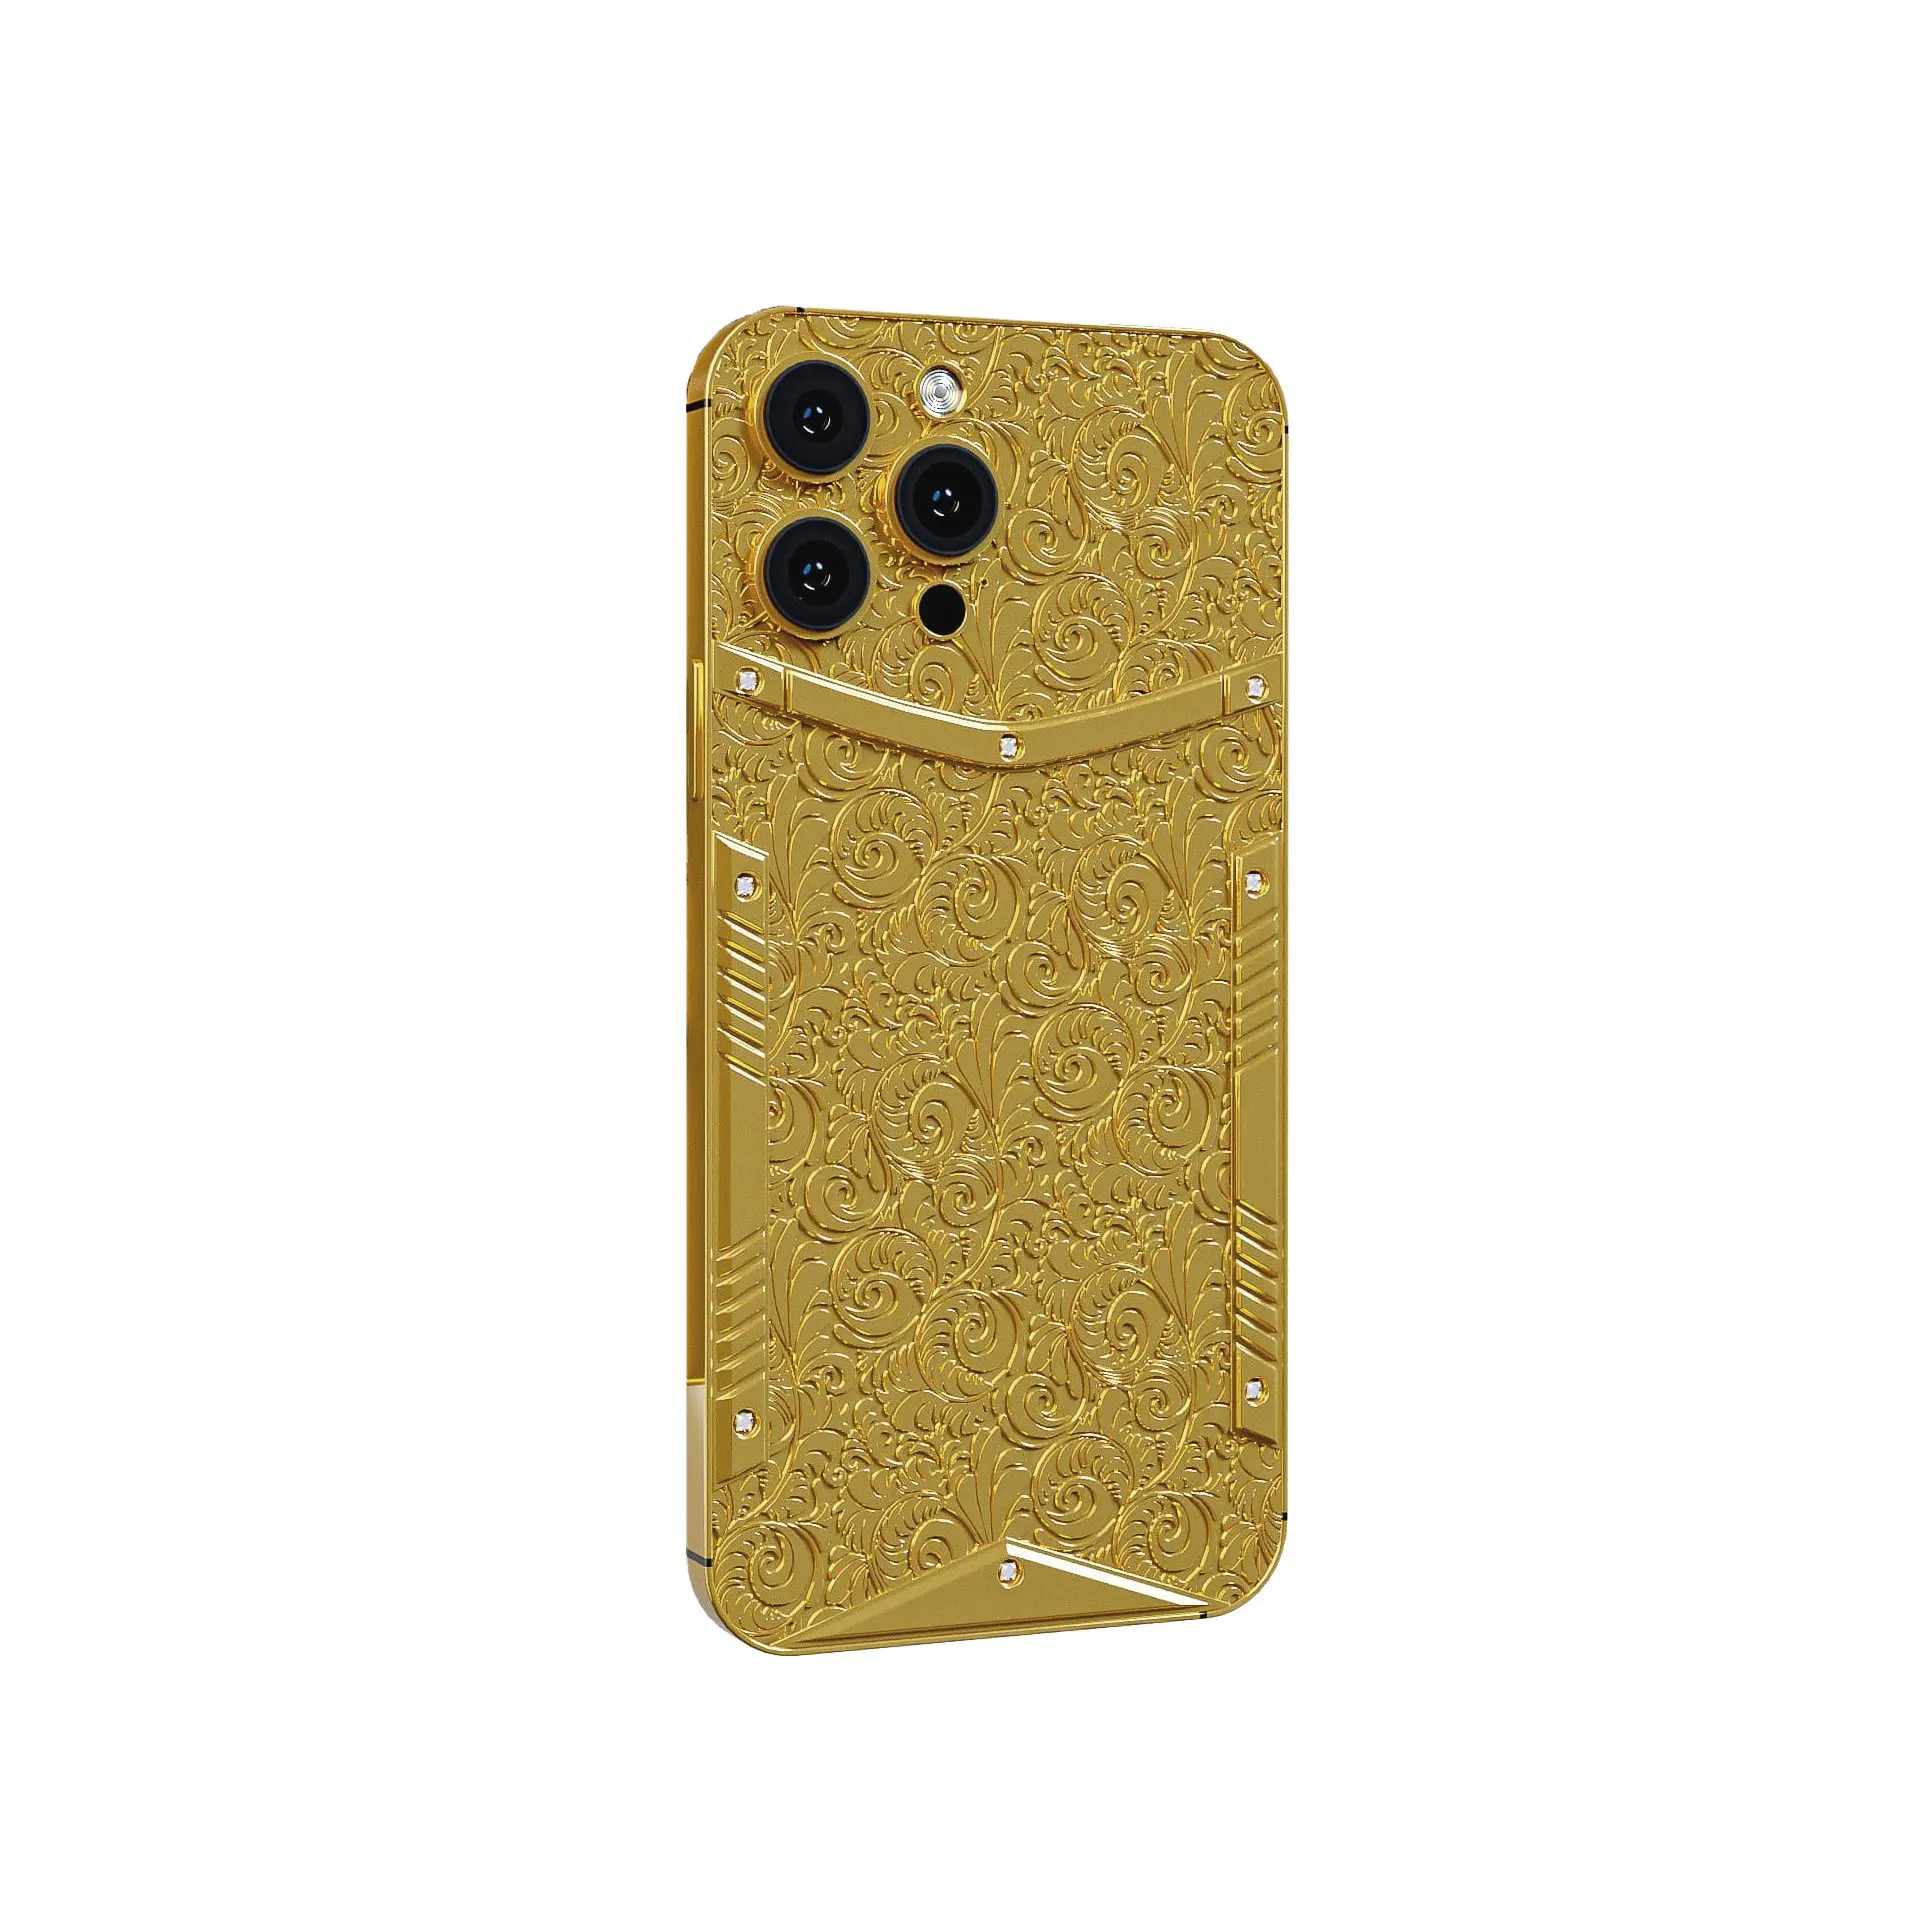 24k-gold-iphone-14-pro-max-luxury-engraved-24k-gold-iphone-14-pro-max